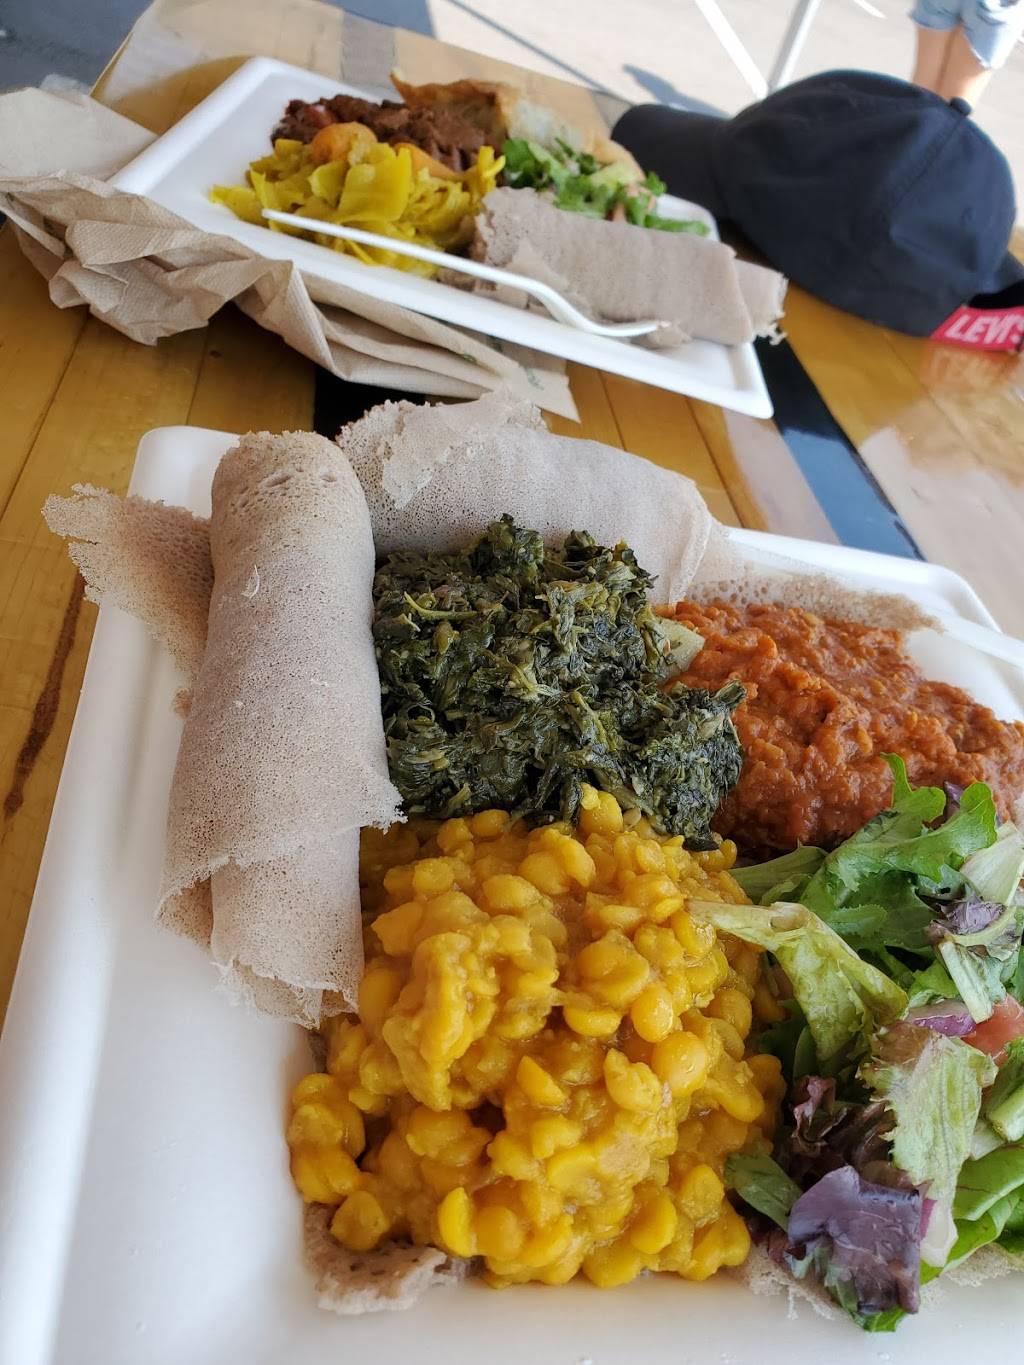 Konjo Ethiopian Food | 5505 W 20th Ave Suite #106 inside the Edgewater Public Market, Edgewater, CO 80214, USA | Phone: (720) 310-5551